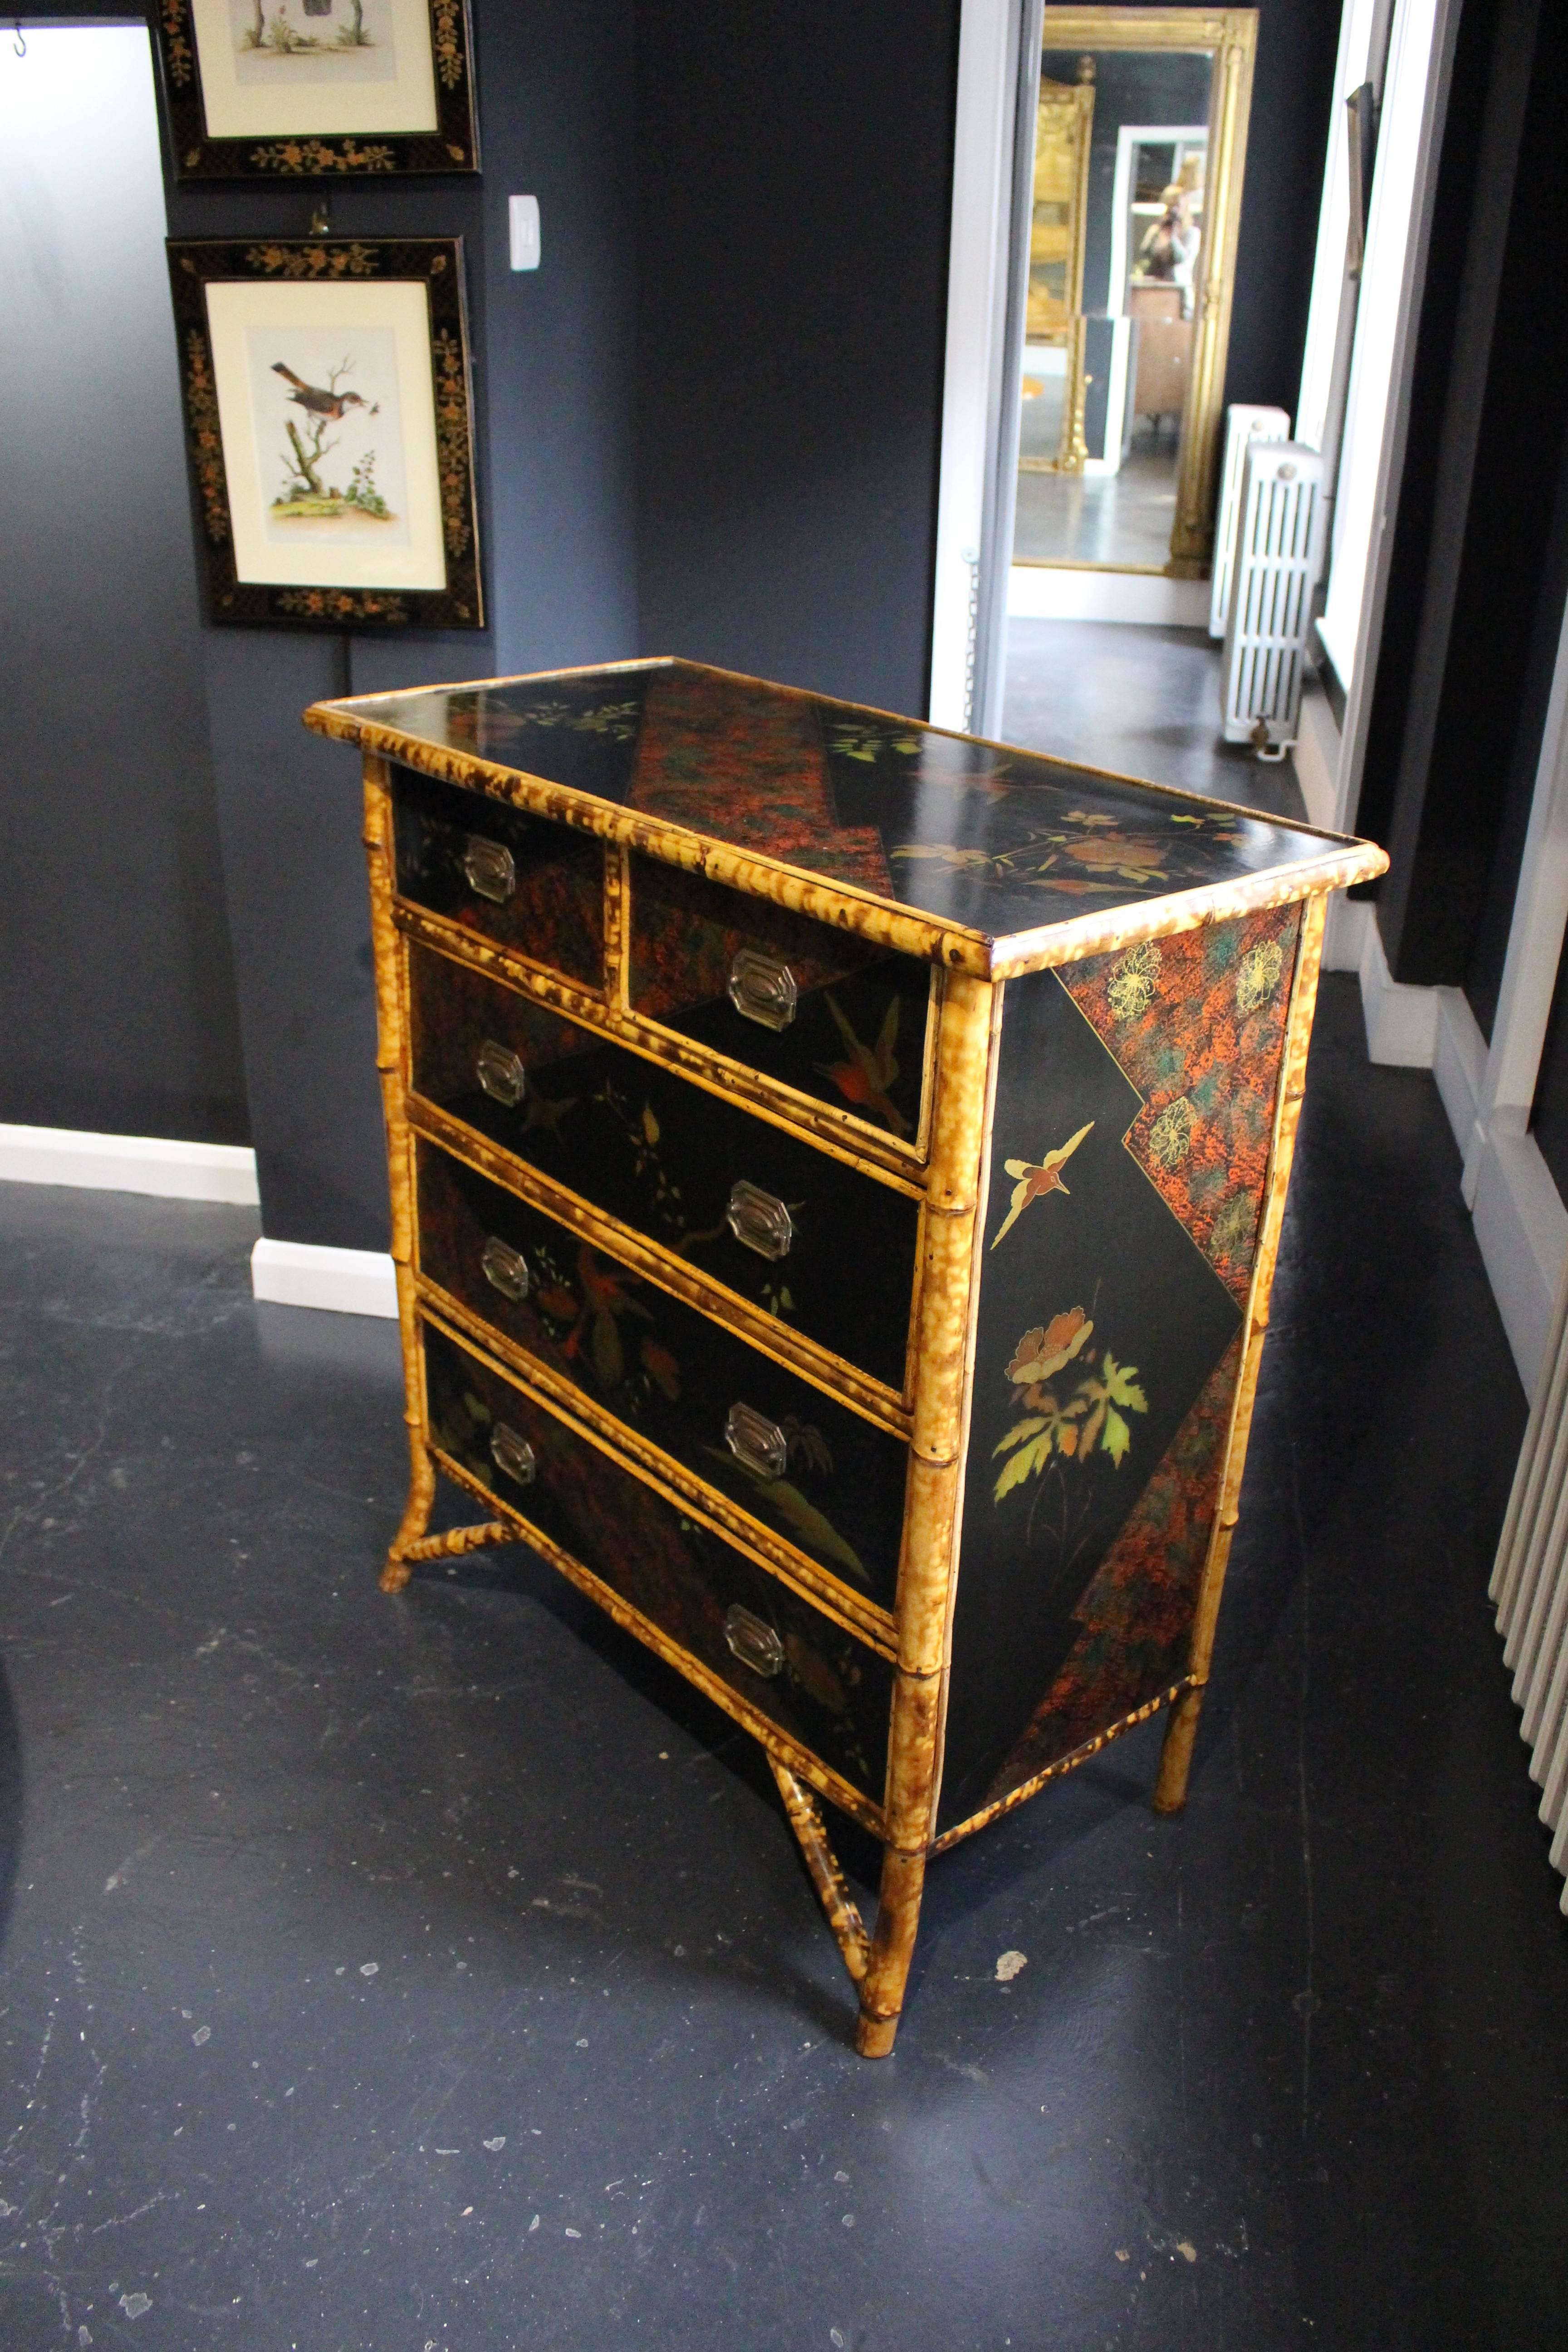 A Victorian black lacquer and japanned chest of drawers, circa 1890. With all-over bird and flowering branch decoration, two short drawers and three long drawers above out-swept legs. Frame made from bamboo.